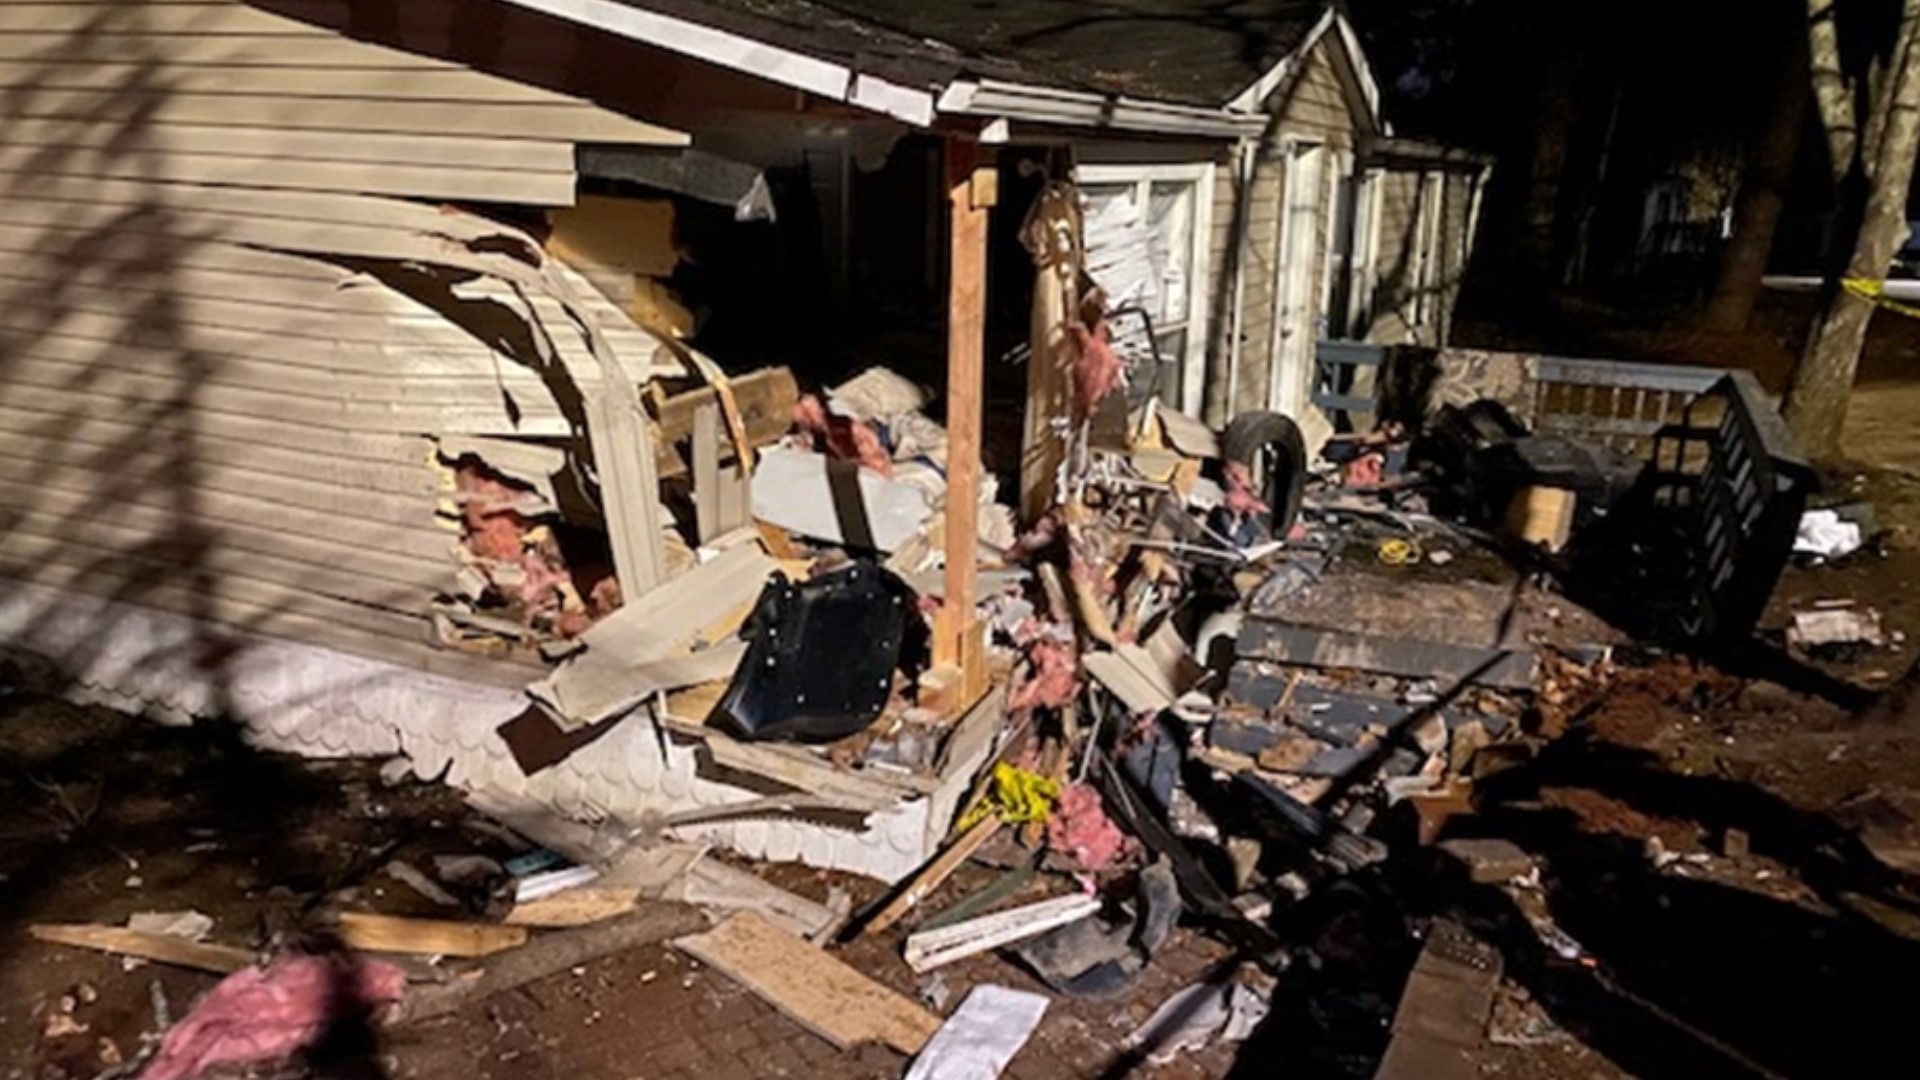 It is not yet known what caused the driver to crash into the home. Authorities also said it is unknown if anyone else was inside the car at the time.